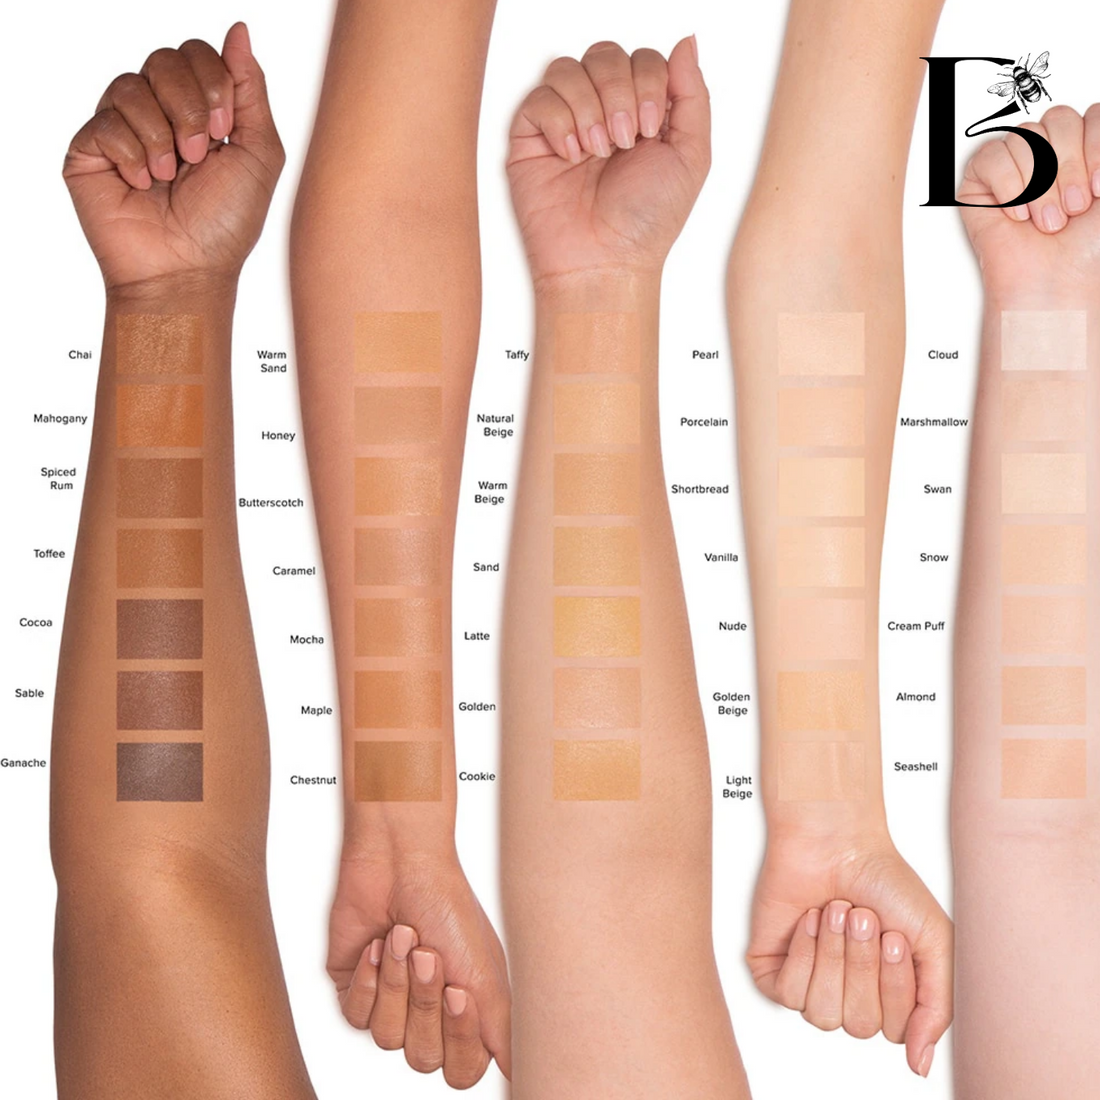 Born This Way Super Coverage Multi-Use Longwear Concealer